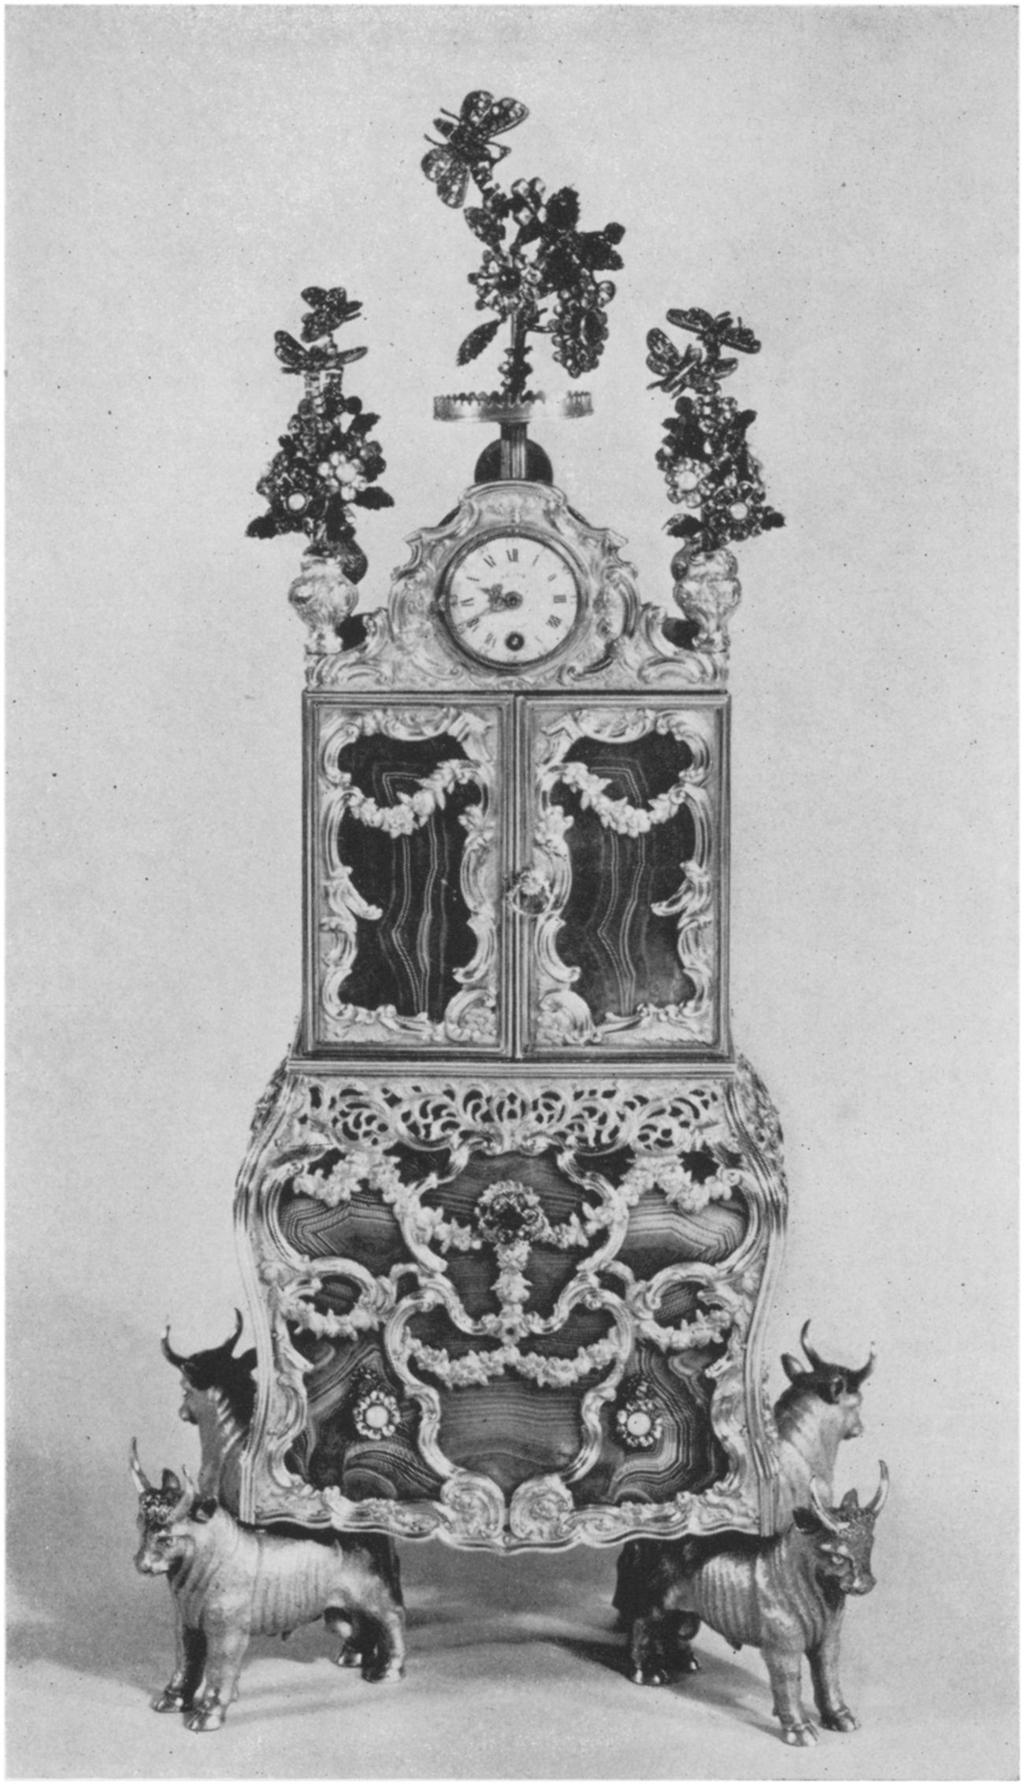 Miniature secretary by James Cox with clock and musical mechanism playing four Chinese tunes.